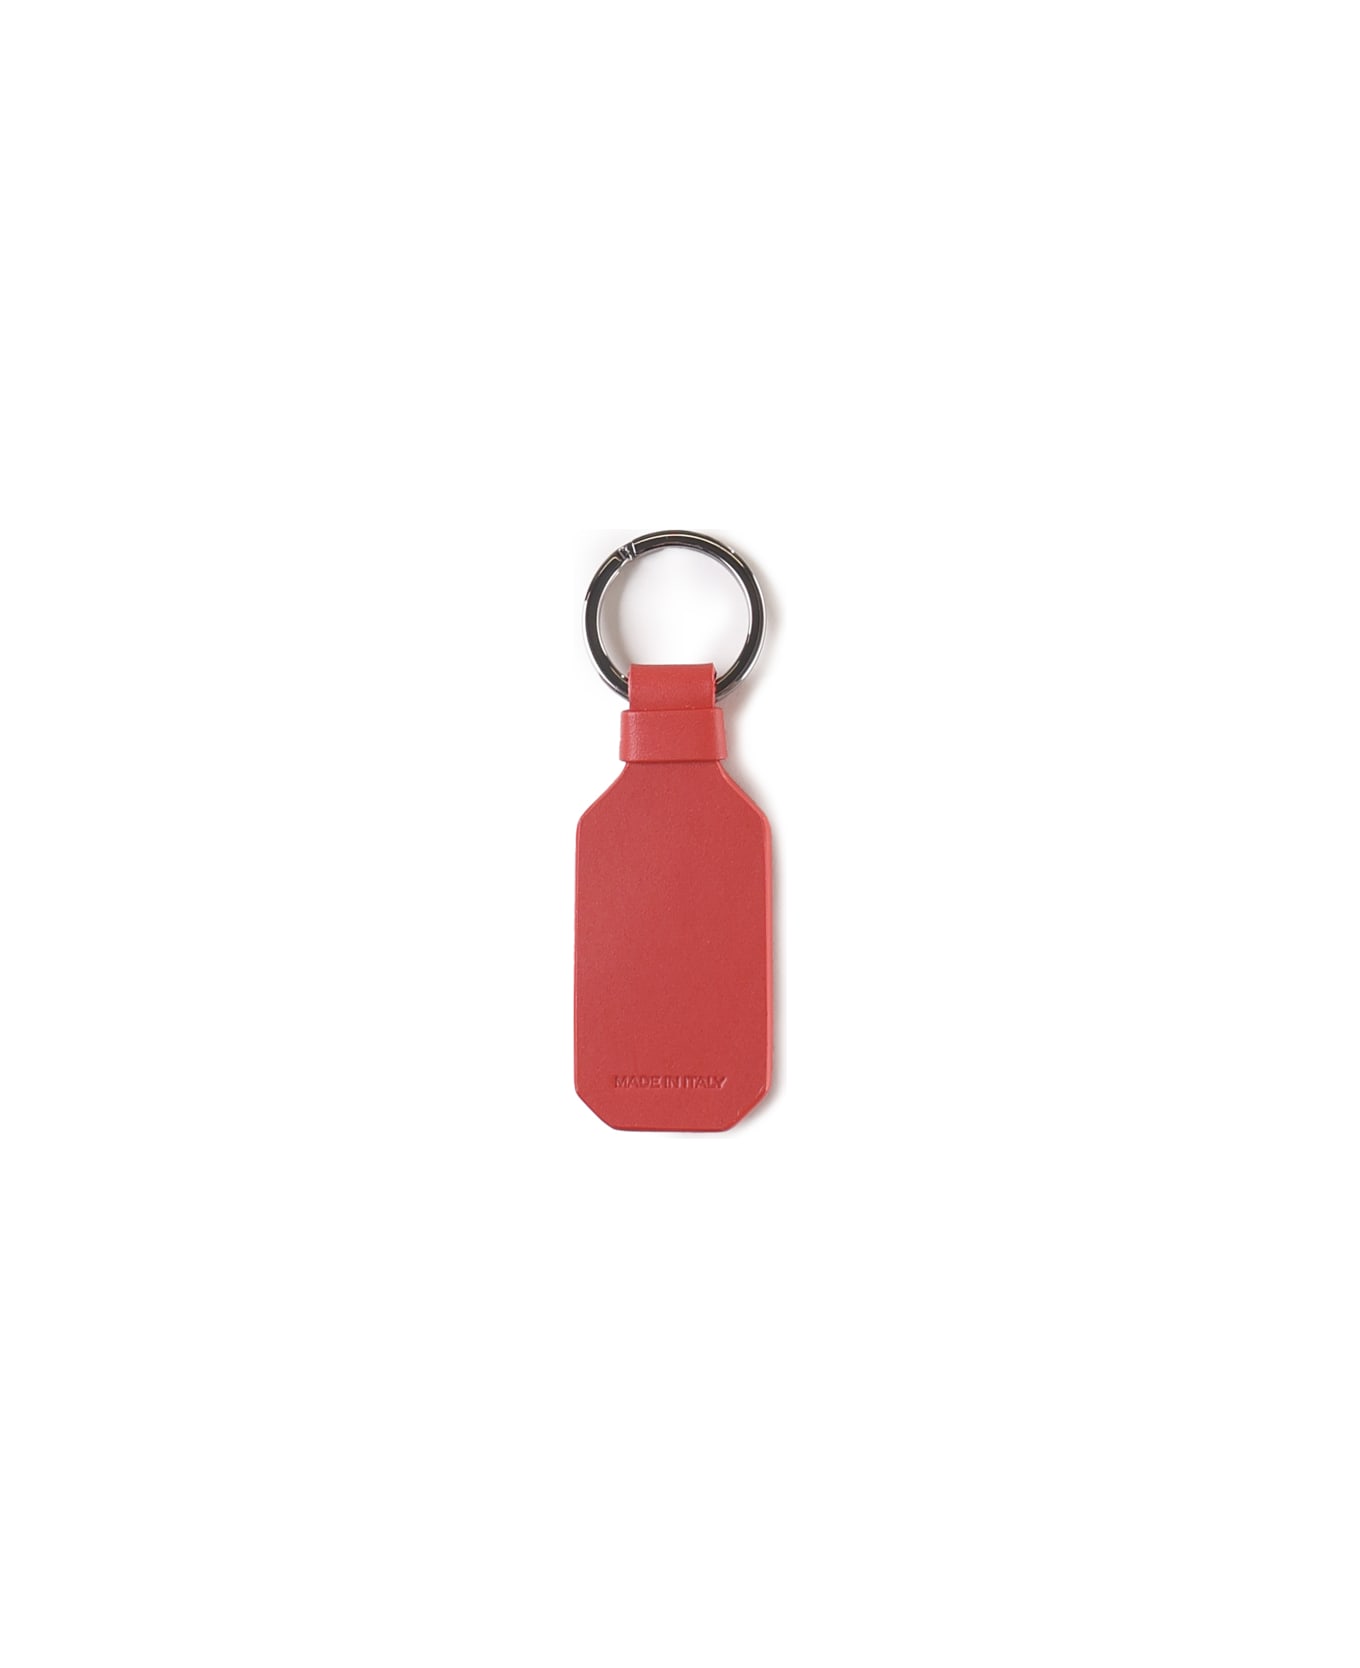 Ferrari Leather Key Ring With Metal Prancing Horse - Red